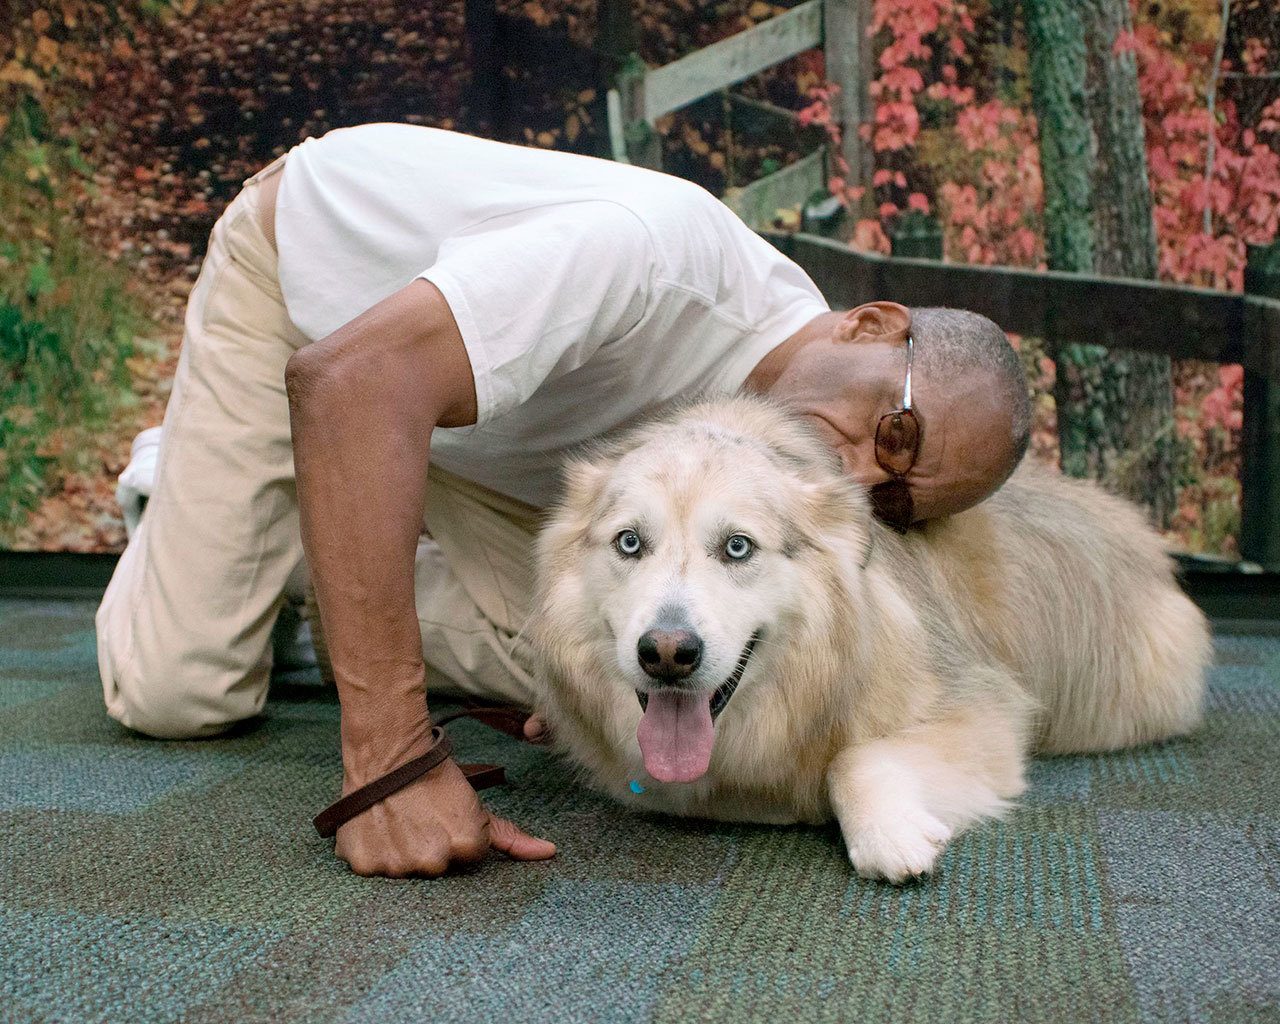 Charles Graves with Sky, a Pyrenees Husky. (Brian Harmon)